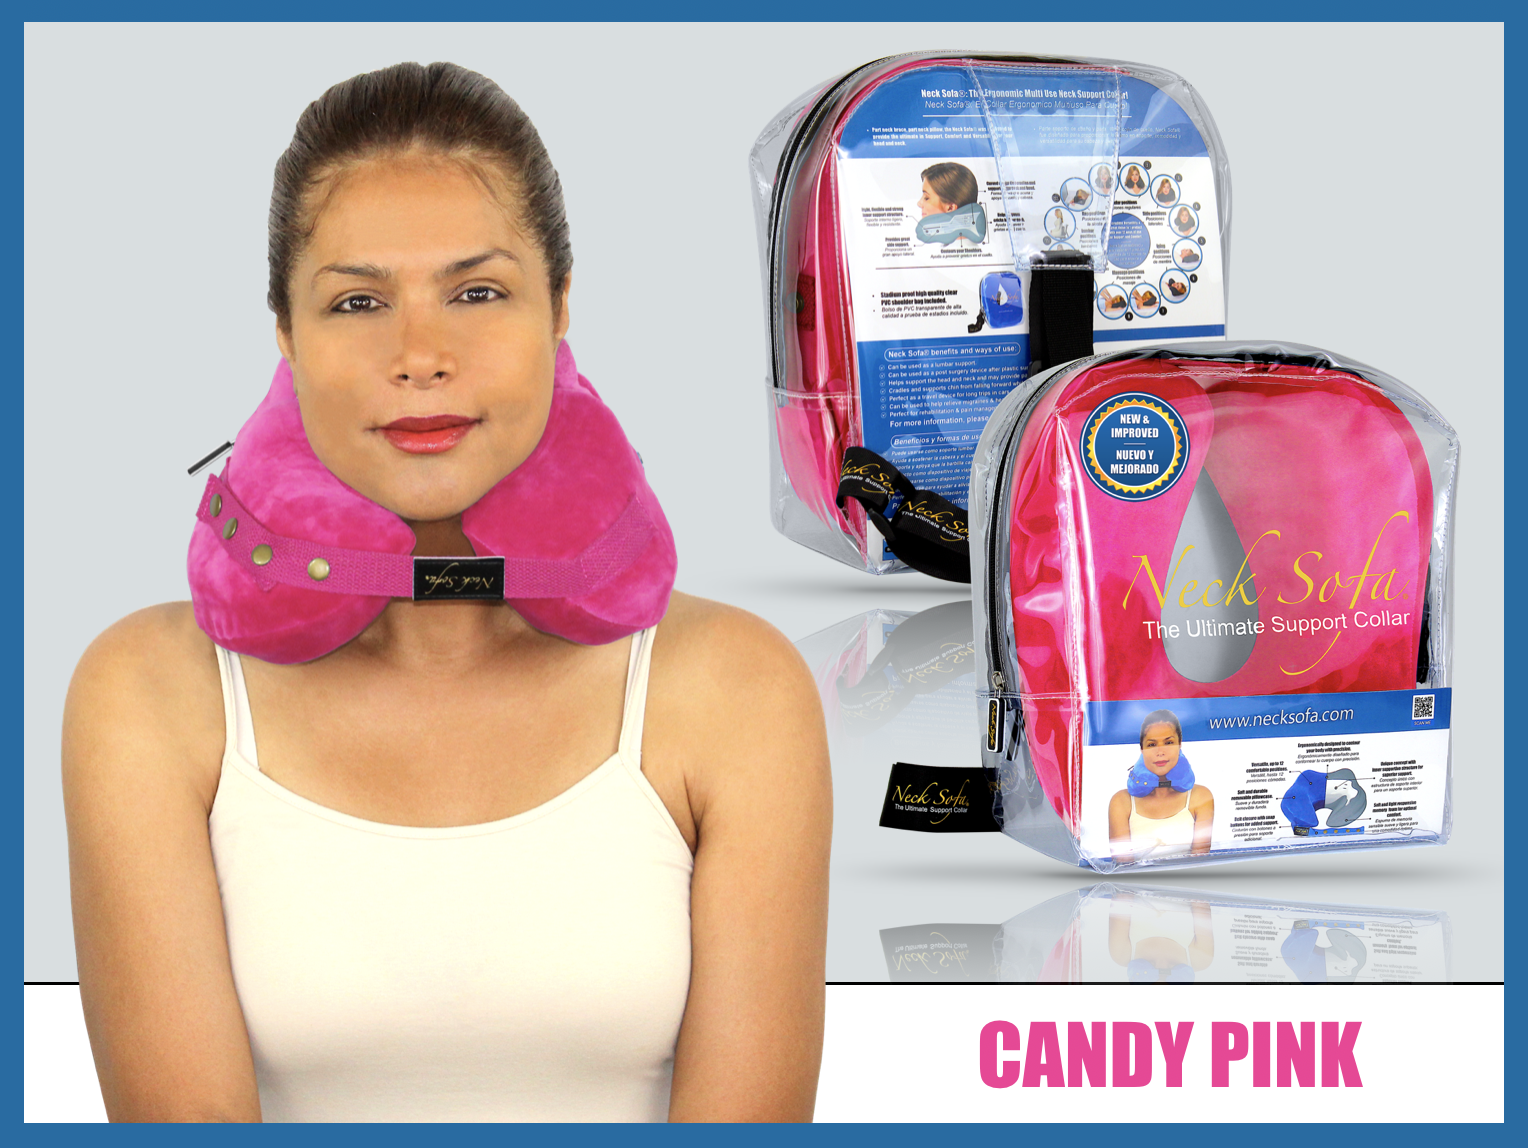 New Neck Sofa® Candy-Pink. Beck Neck Pillow for head and Neck Support.